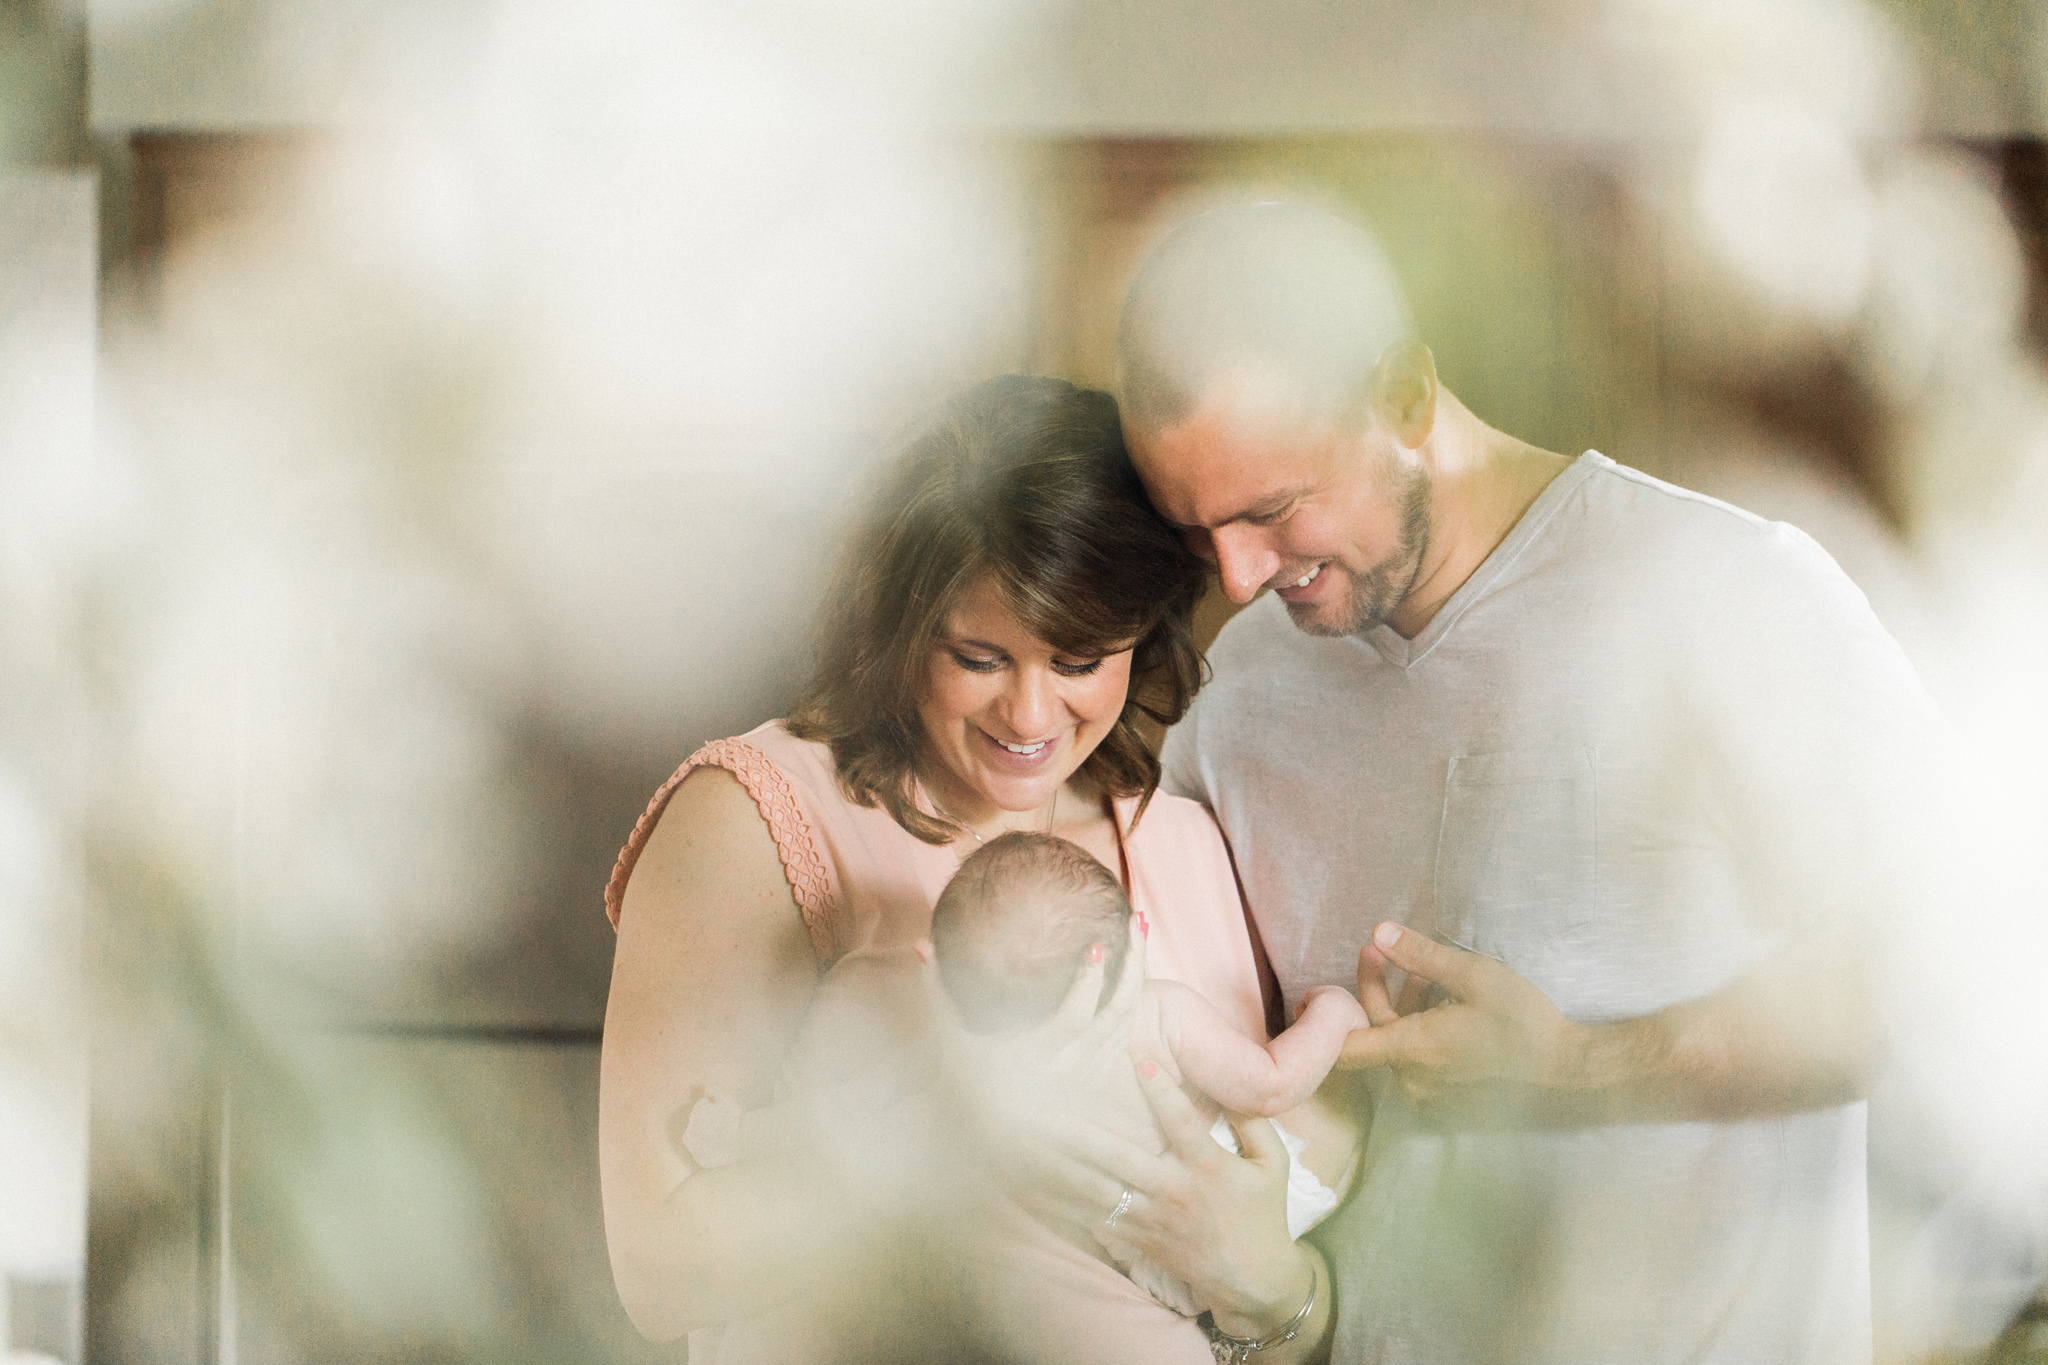 BEE MINE PHOTOGRAPHY // Akron Canton Cleveland Photographer // lifestyle newborn photographer, canton ohio newborn photographer, canton ohio maternity photographer, akron maternity photographer, akron newborn photographer, cleveland maternity photographer, cleveland newborn photographer